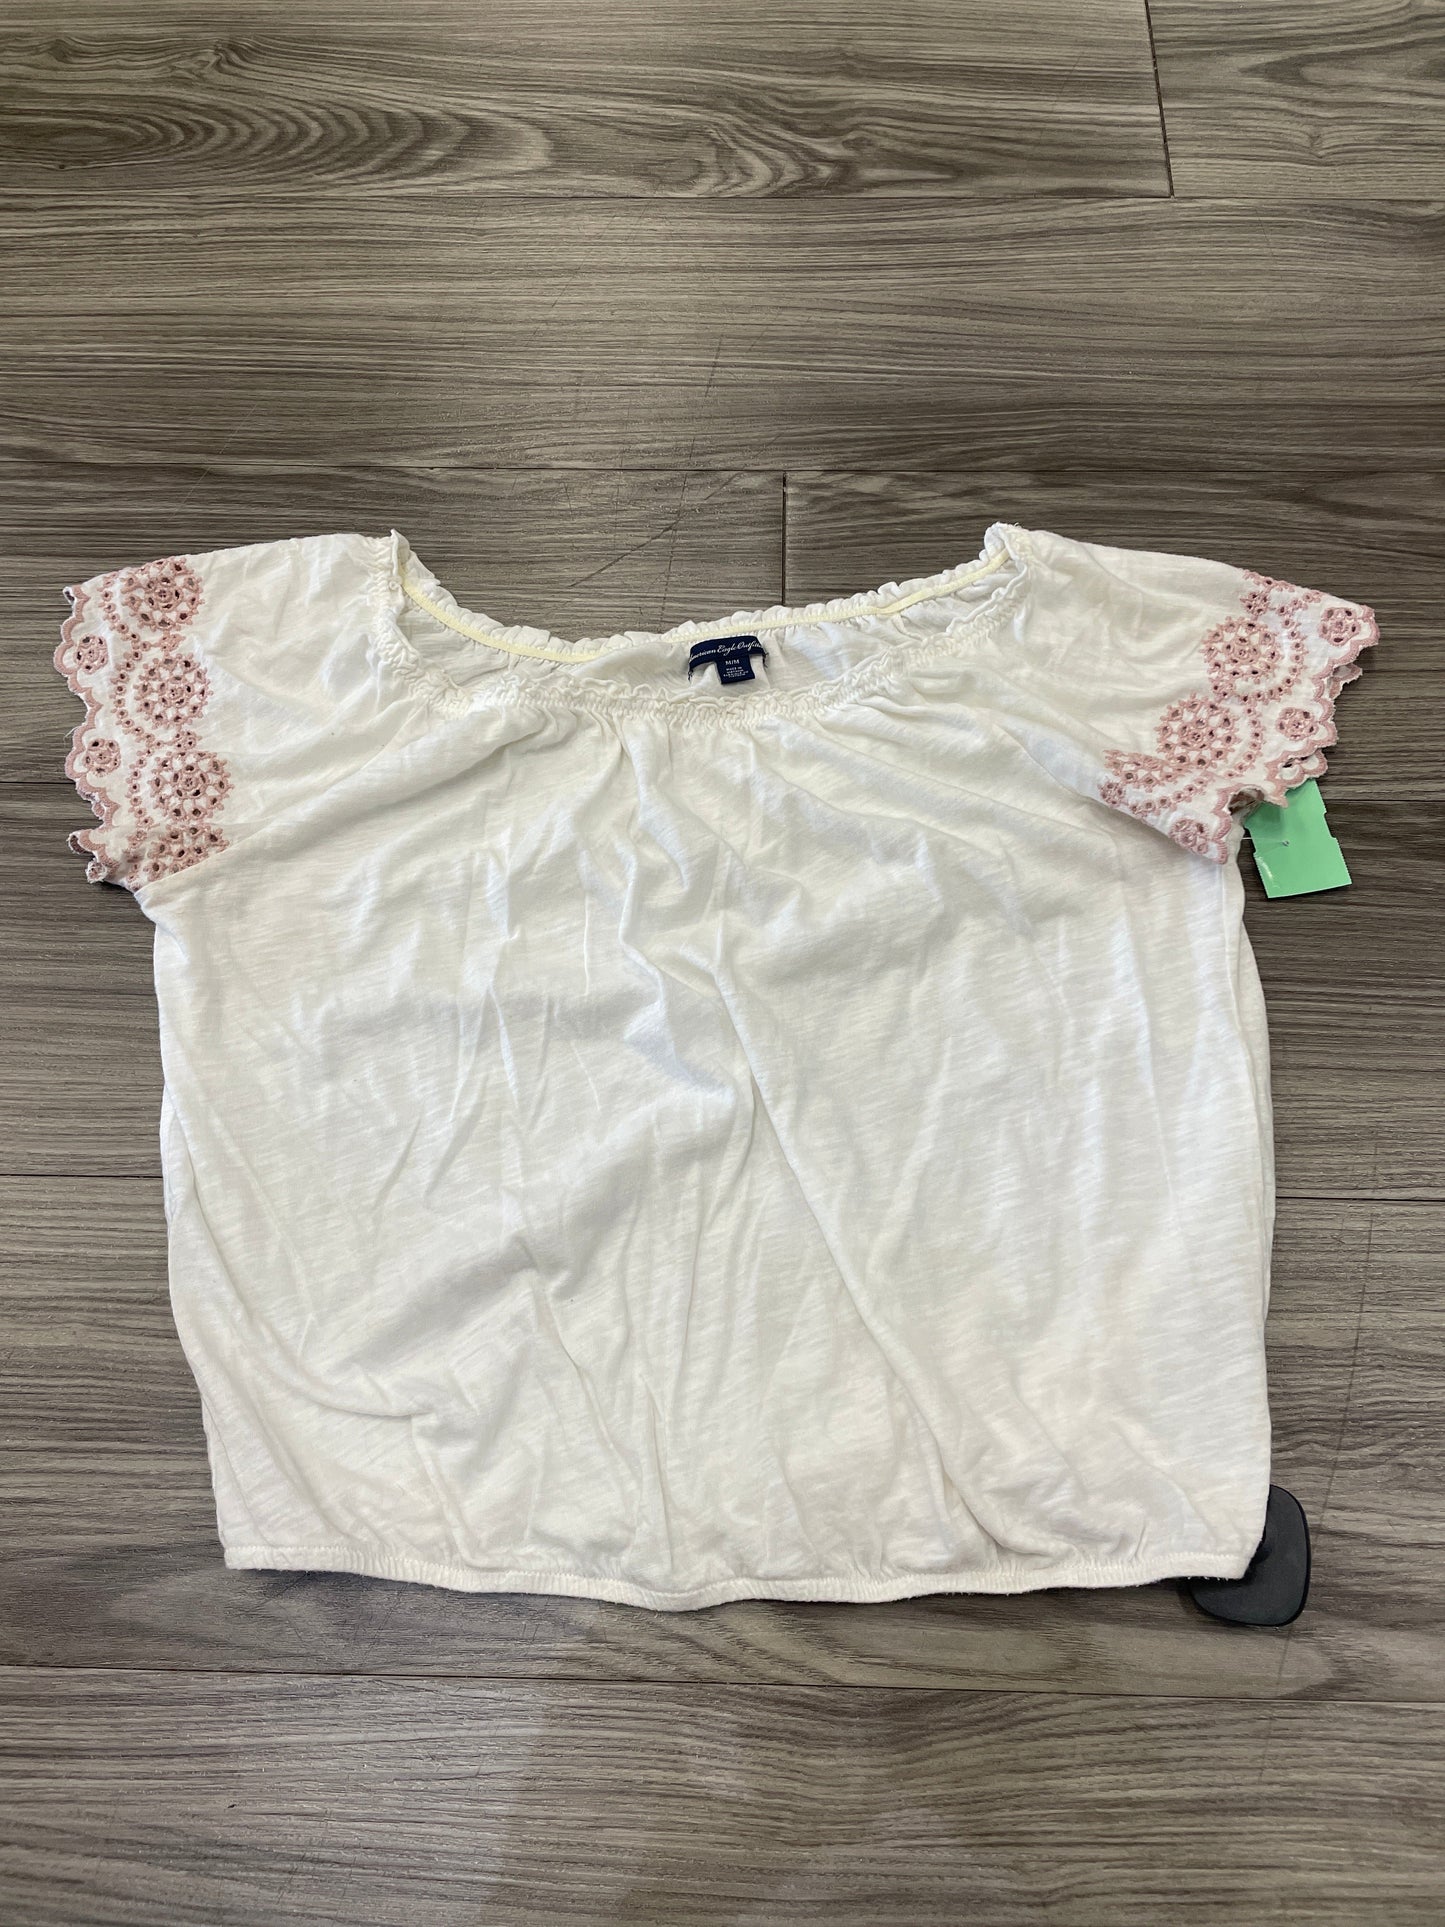 White Top Short Sleeve American Eagle, Size M